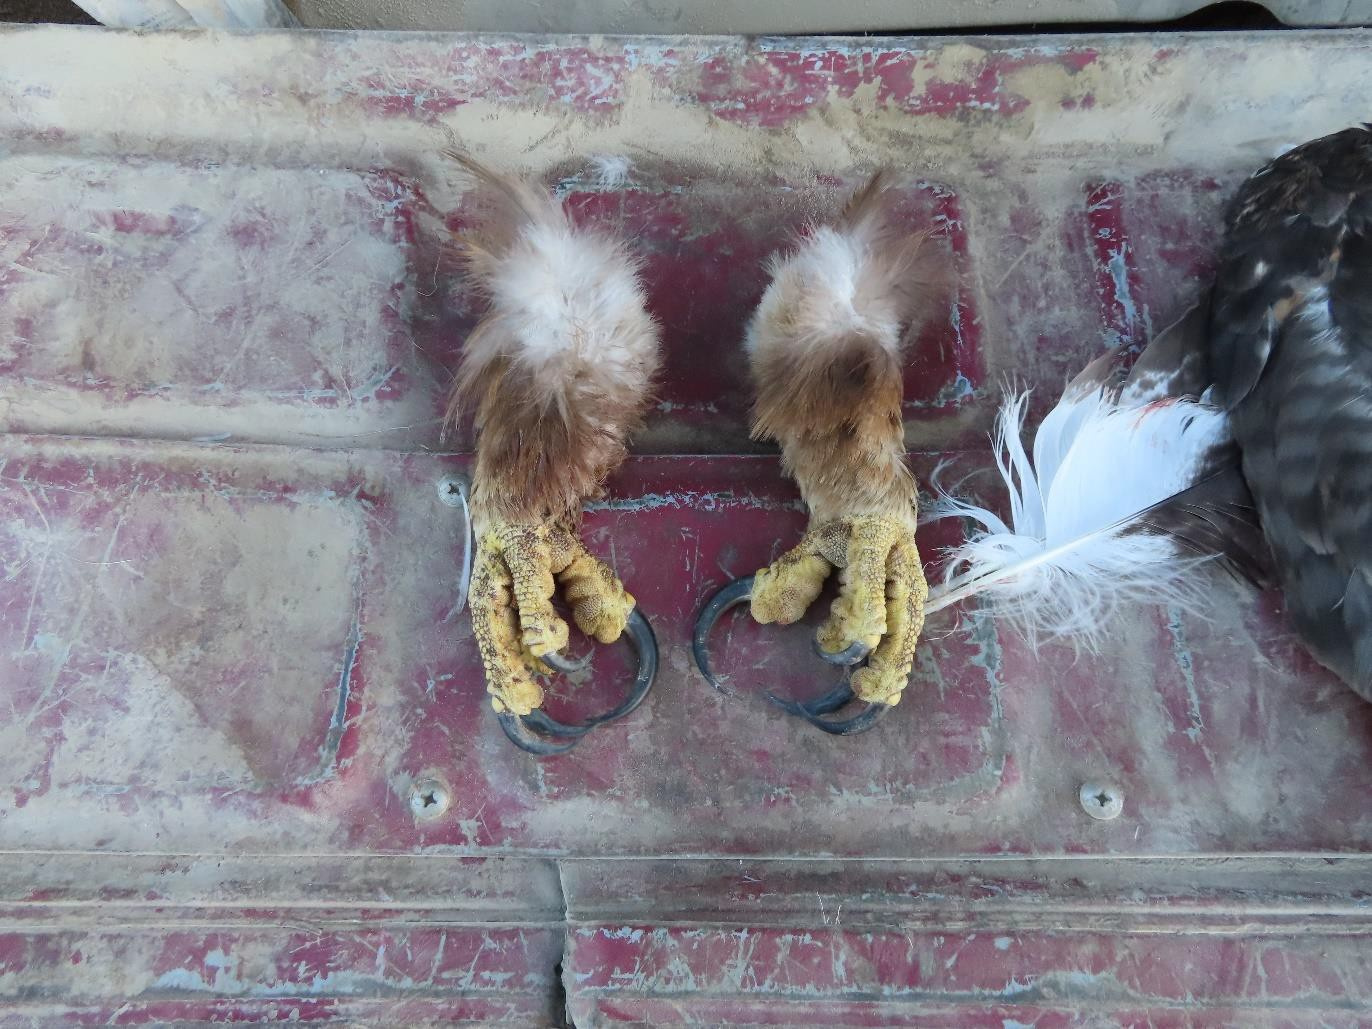 Two Idaho Poachers Banned From Hunting and Possessing Firearms for Killing a Golden Eagle